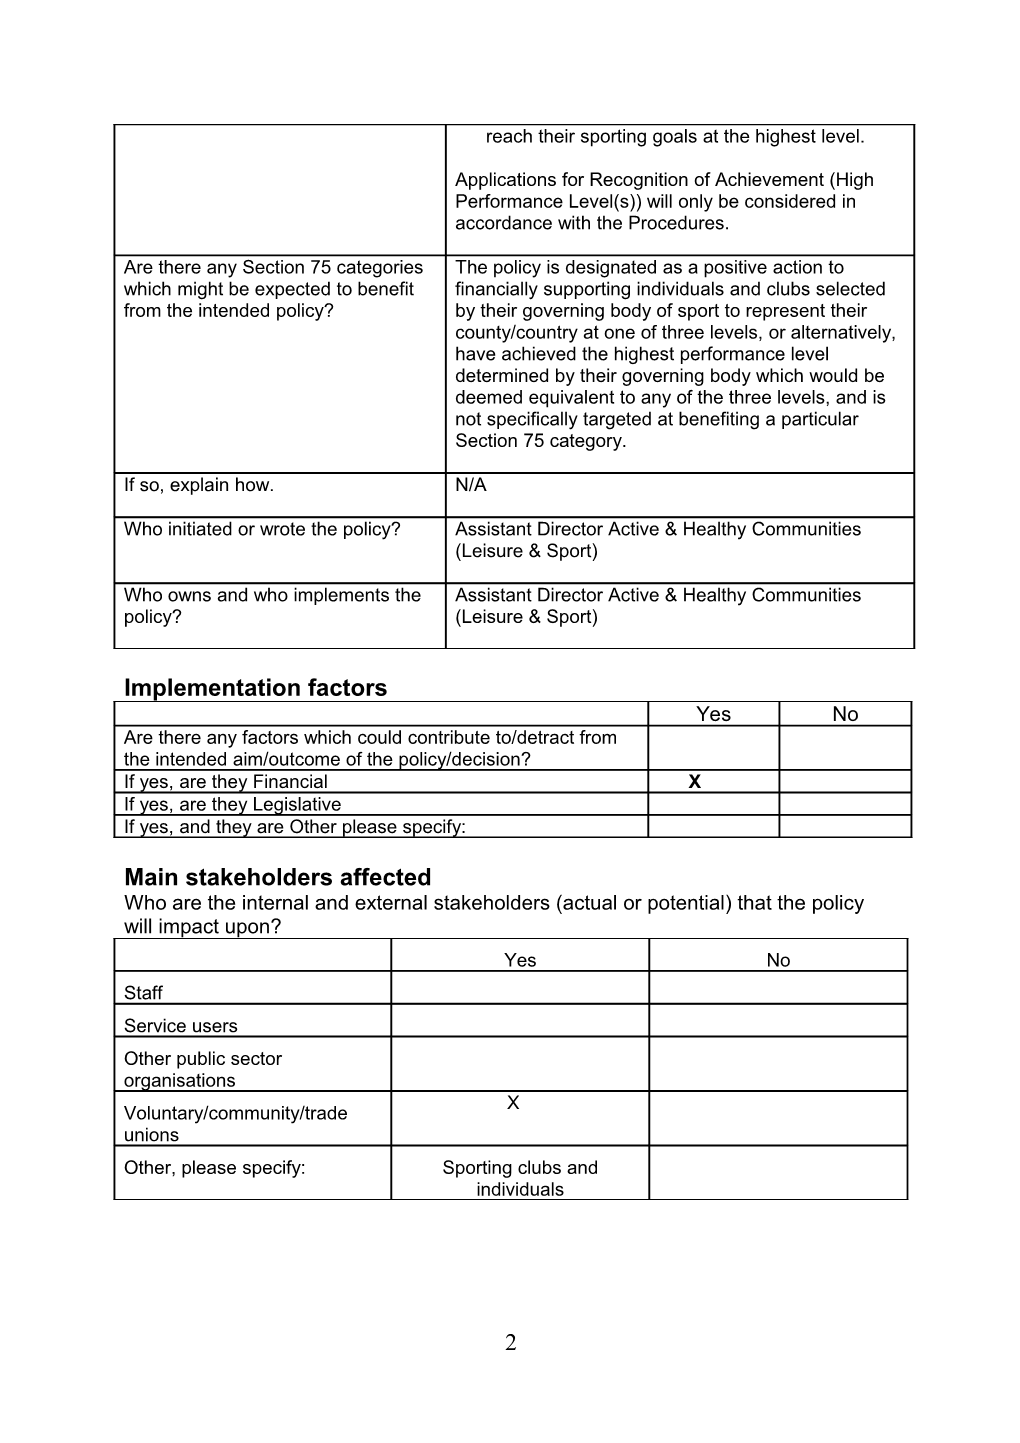 Newry, Mourne and Down District Council Policy Screening Form s2